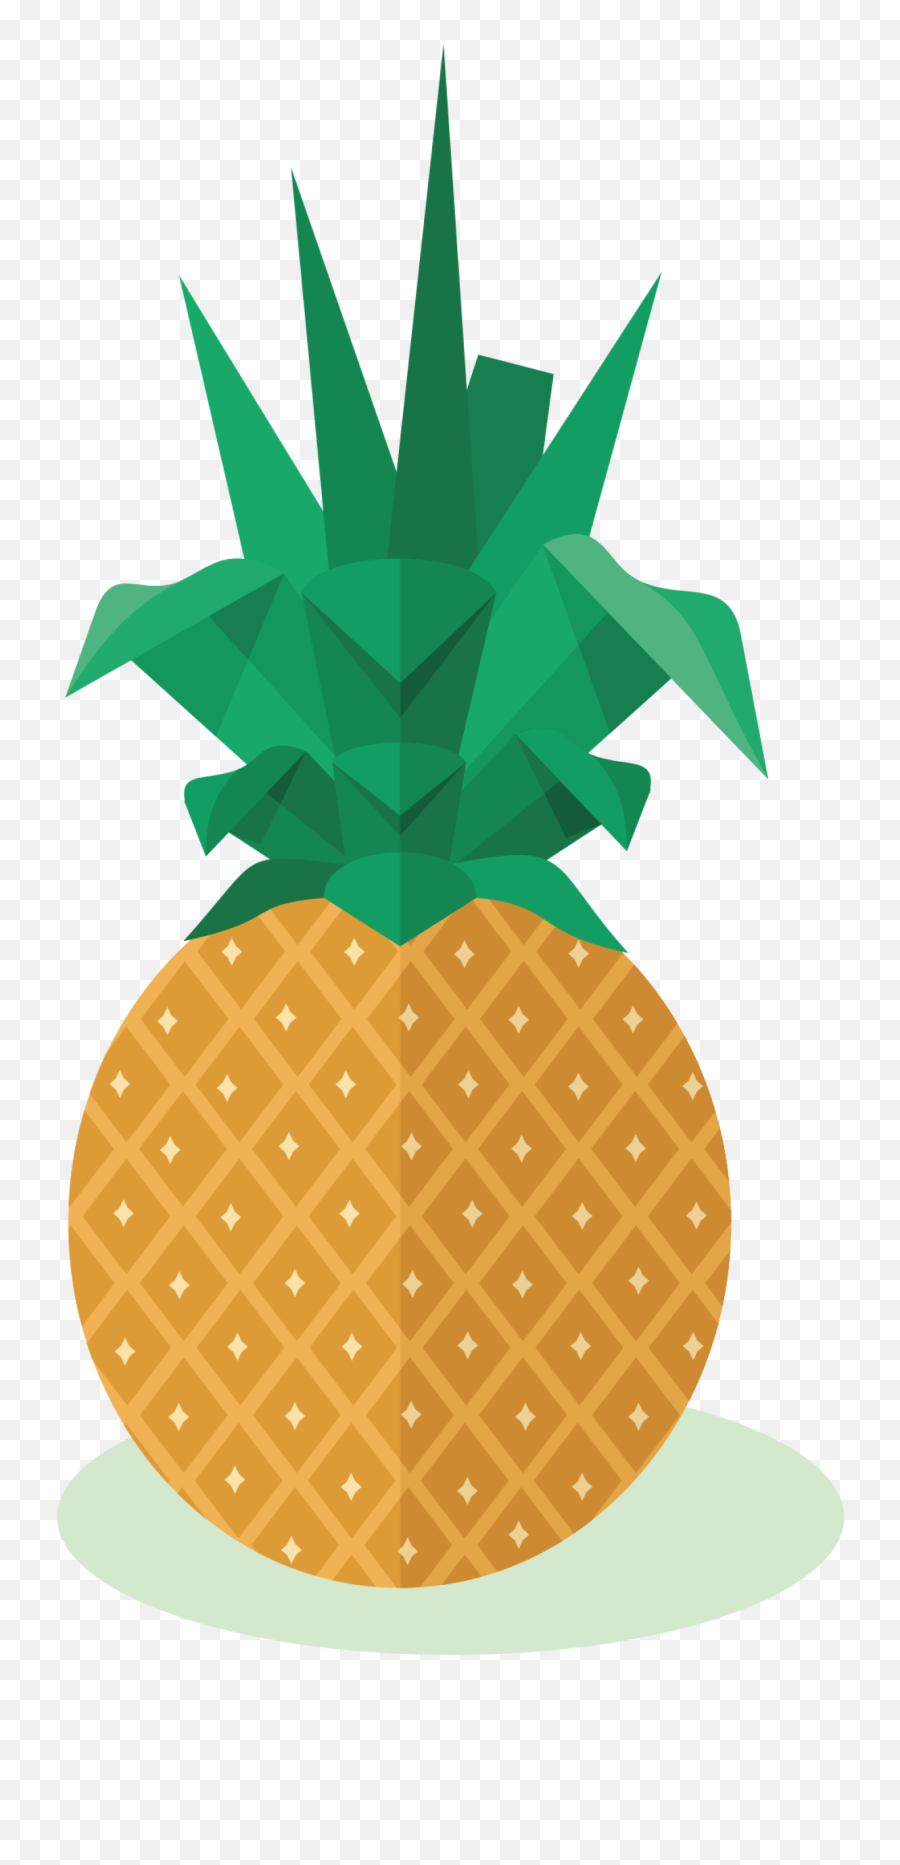 Download Hd Pineapple Fruit Clipart Of - Pineapple Png,Pineapple Cartoon Png